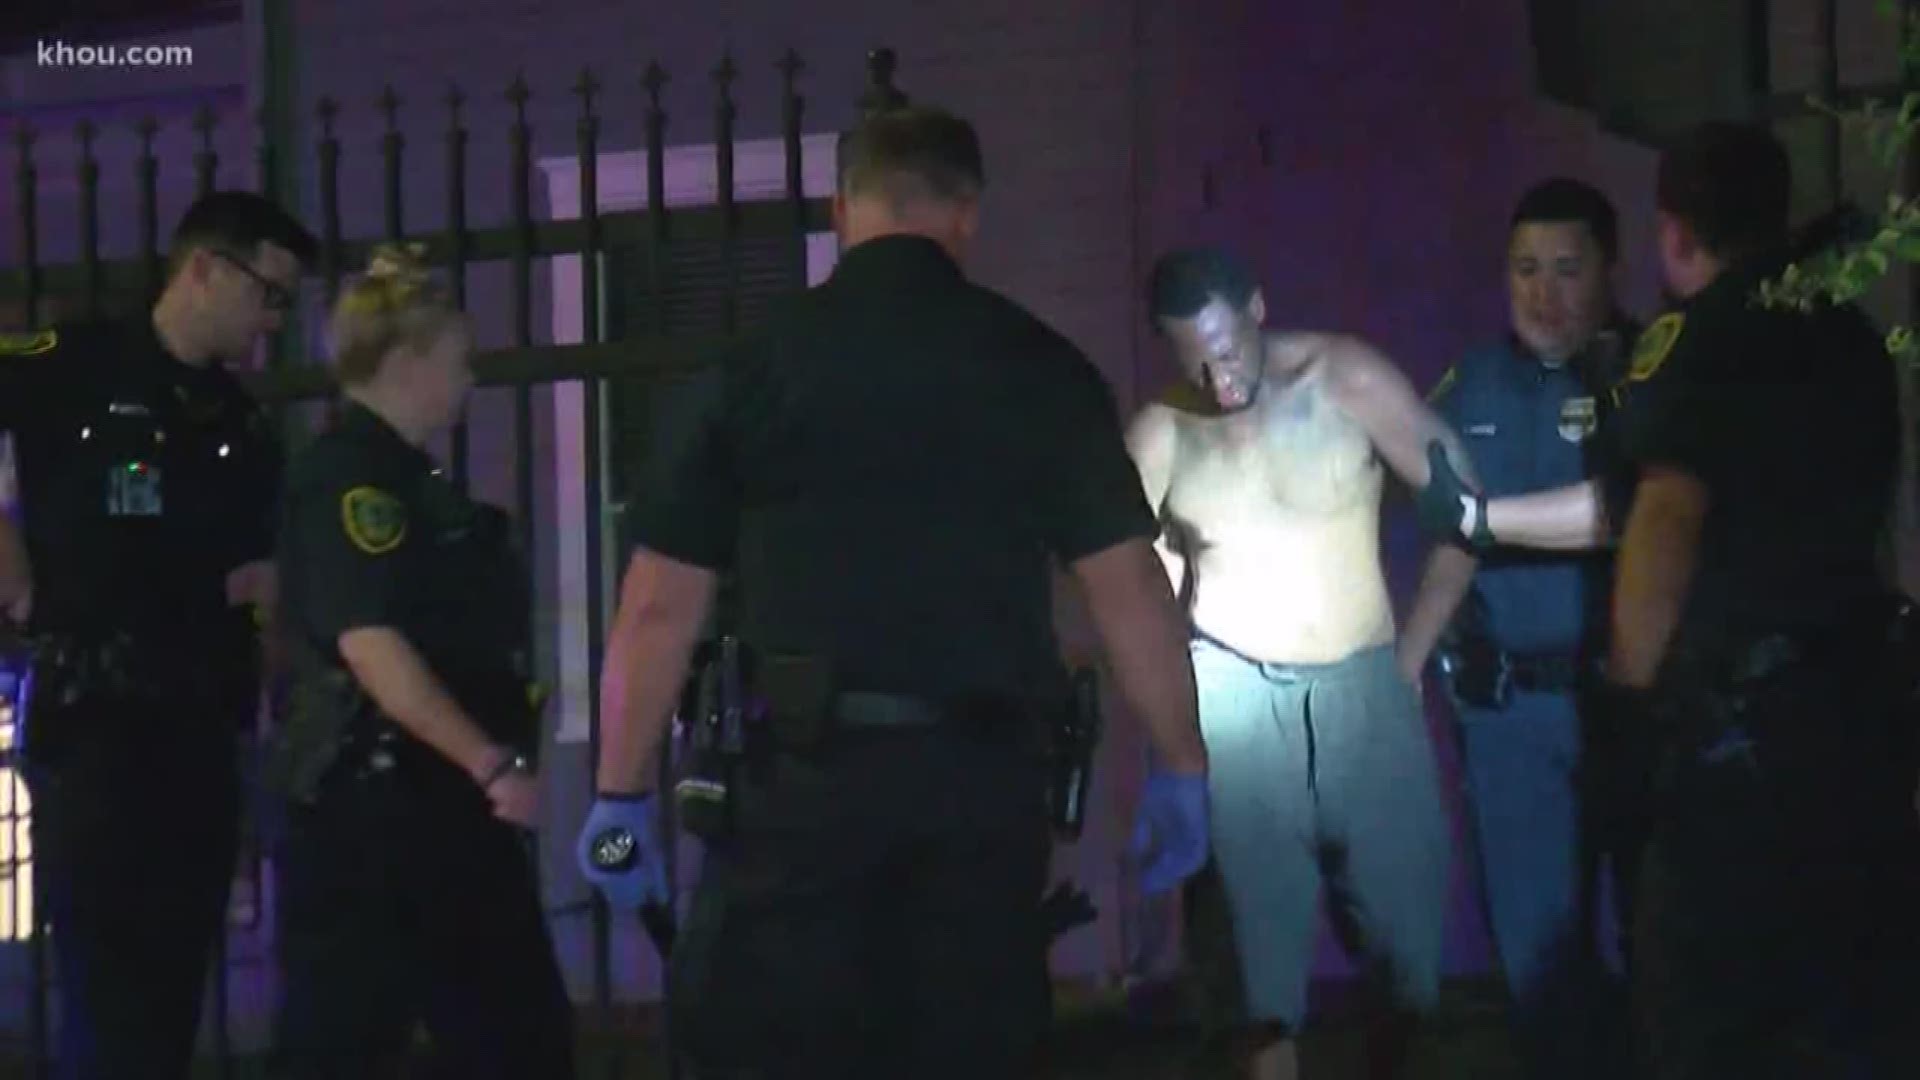 The suspect was arrested in Houston's midtown early Tuesday morning. 3000 block of Bagby.